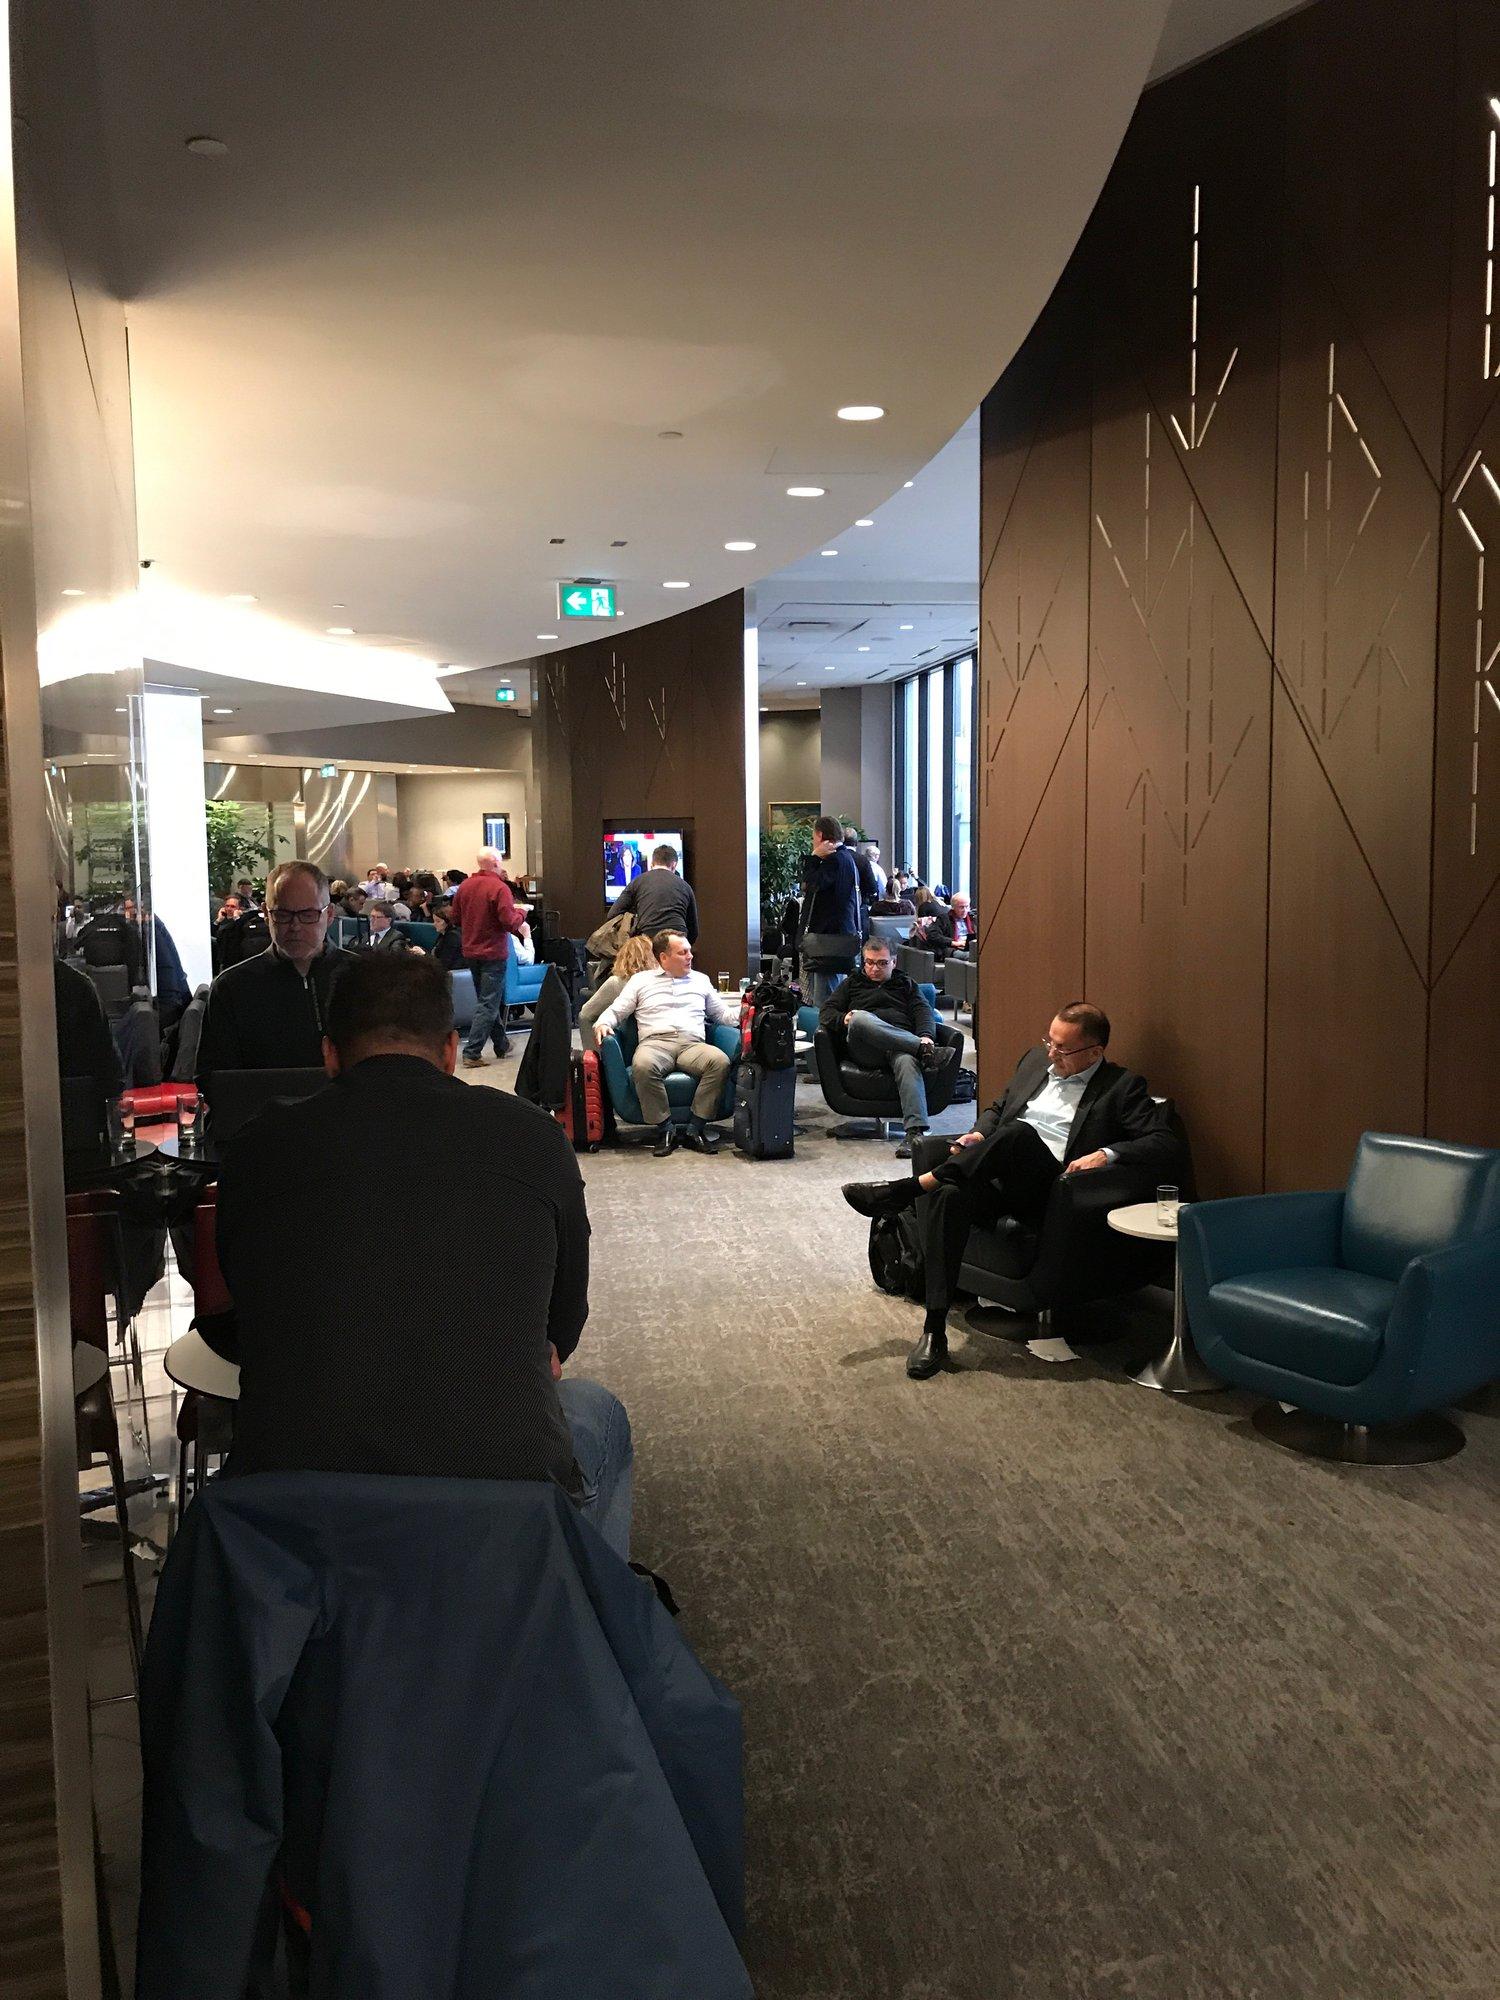 Air Canada Maple Leaf Lounge image 2 of 3